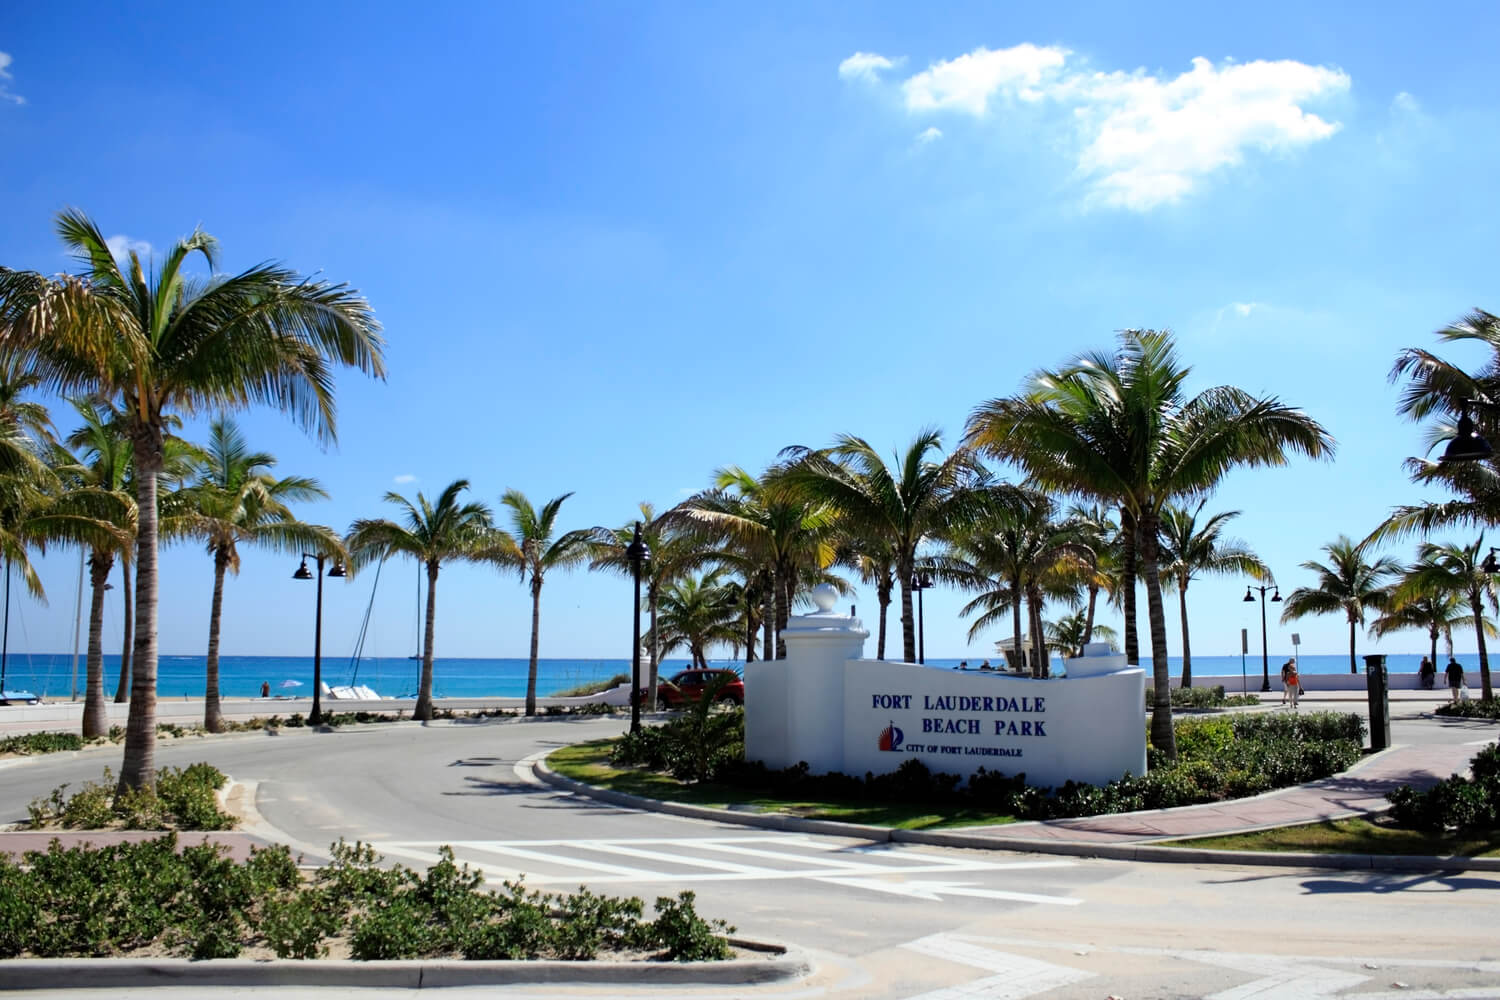 What You Need to Know About Fort Lauderdale Beach Park